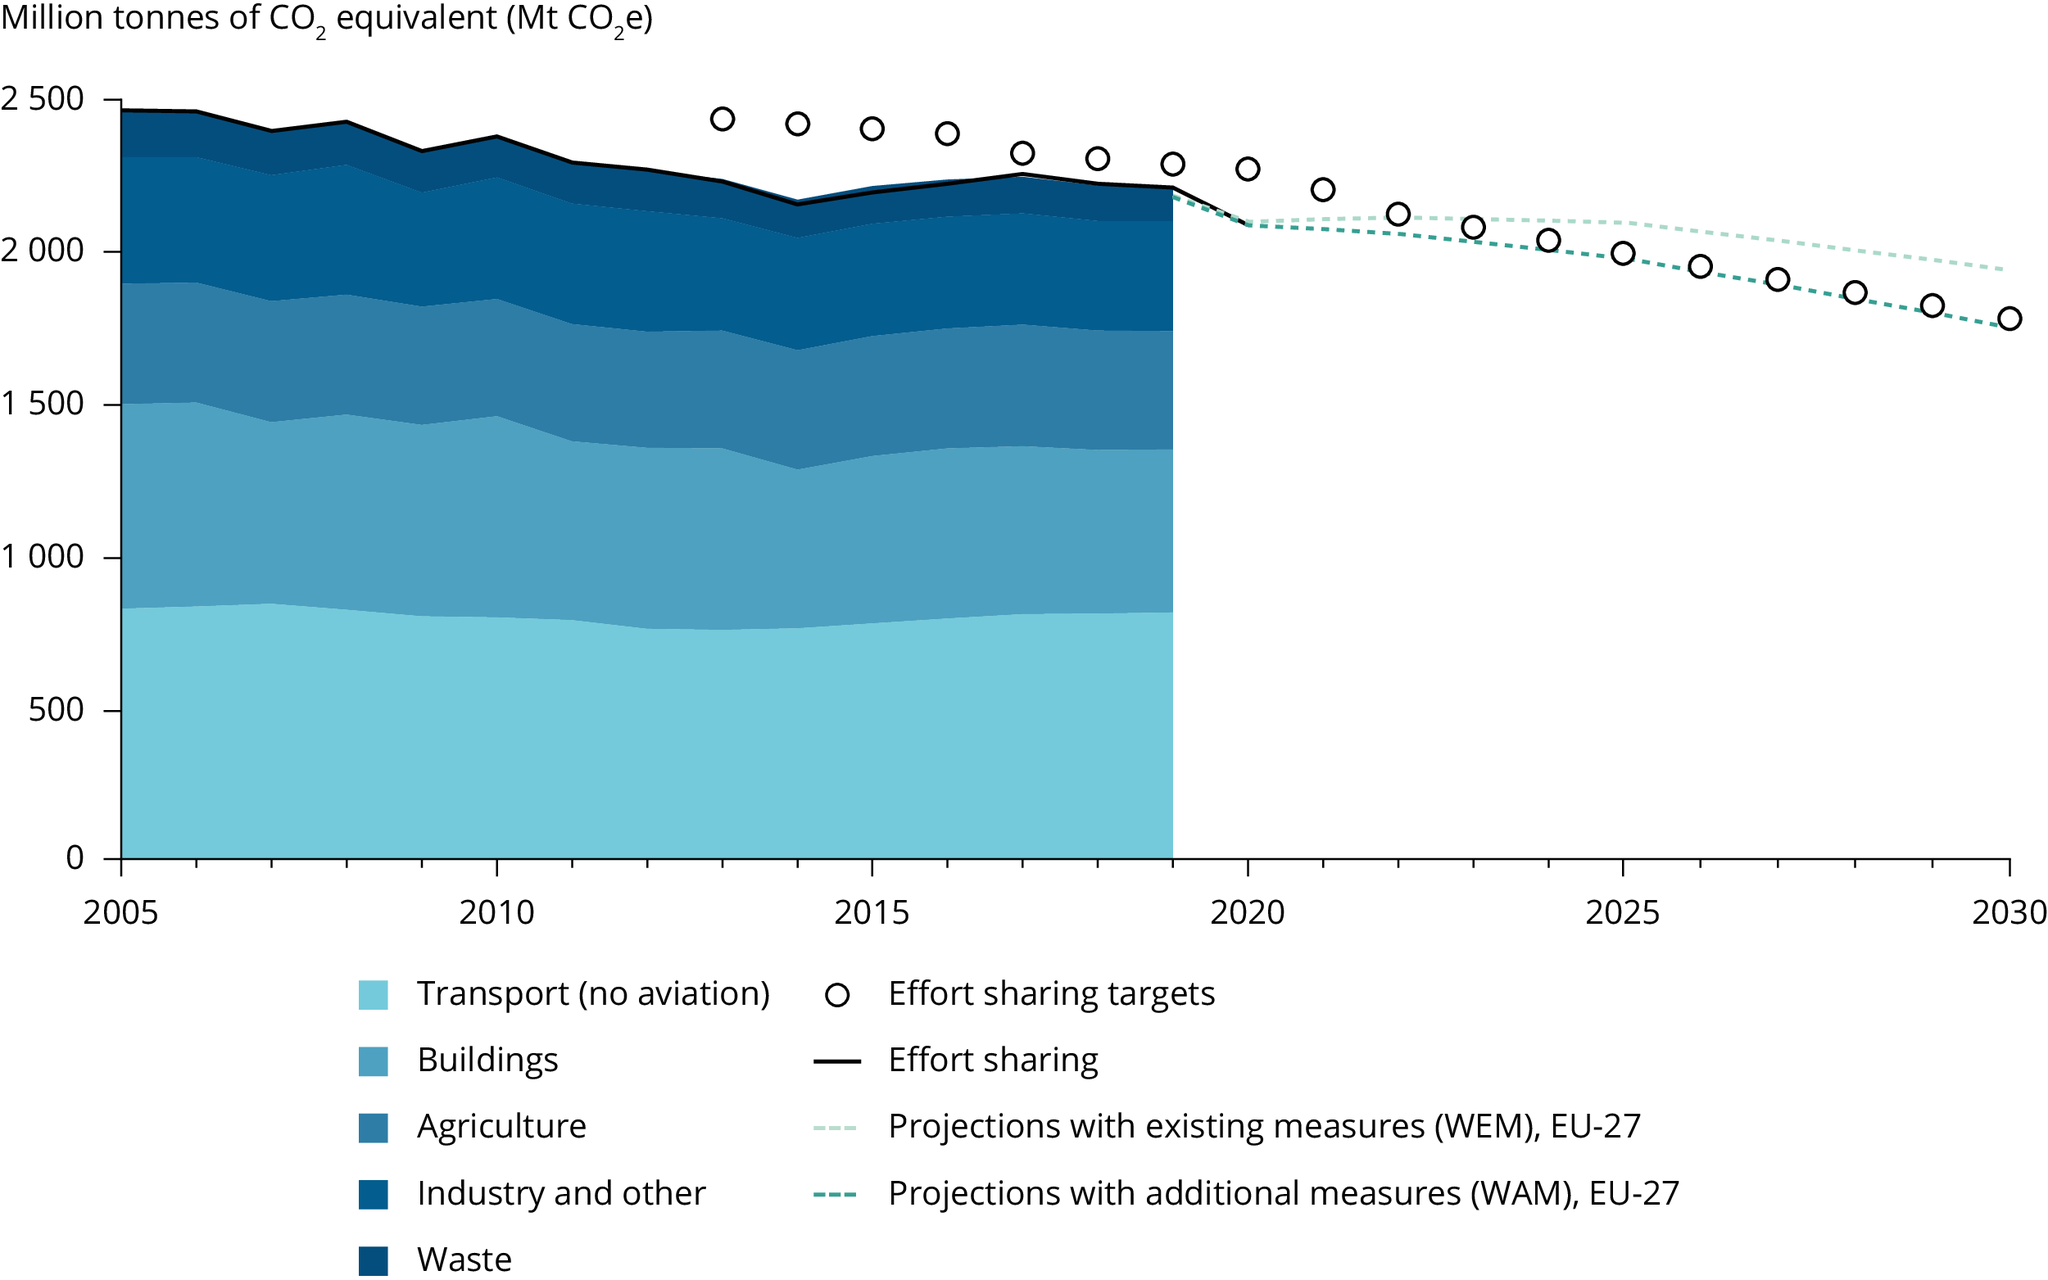 EU-27 GHG emission trends and projections under the scope of the Effort Sharing legislation